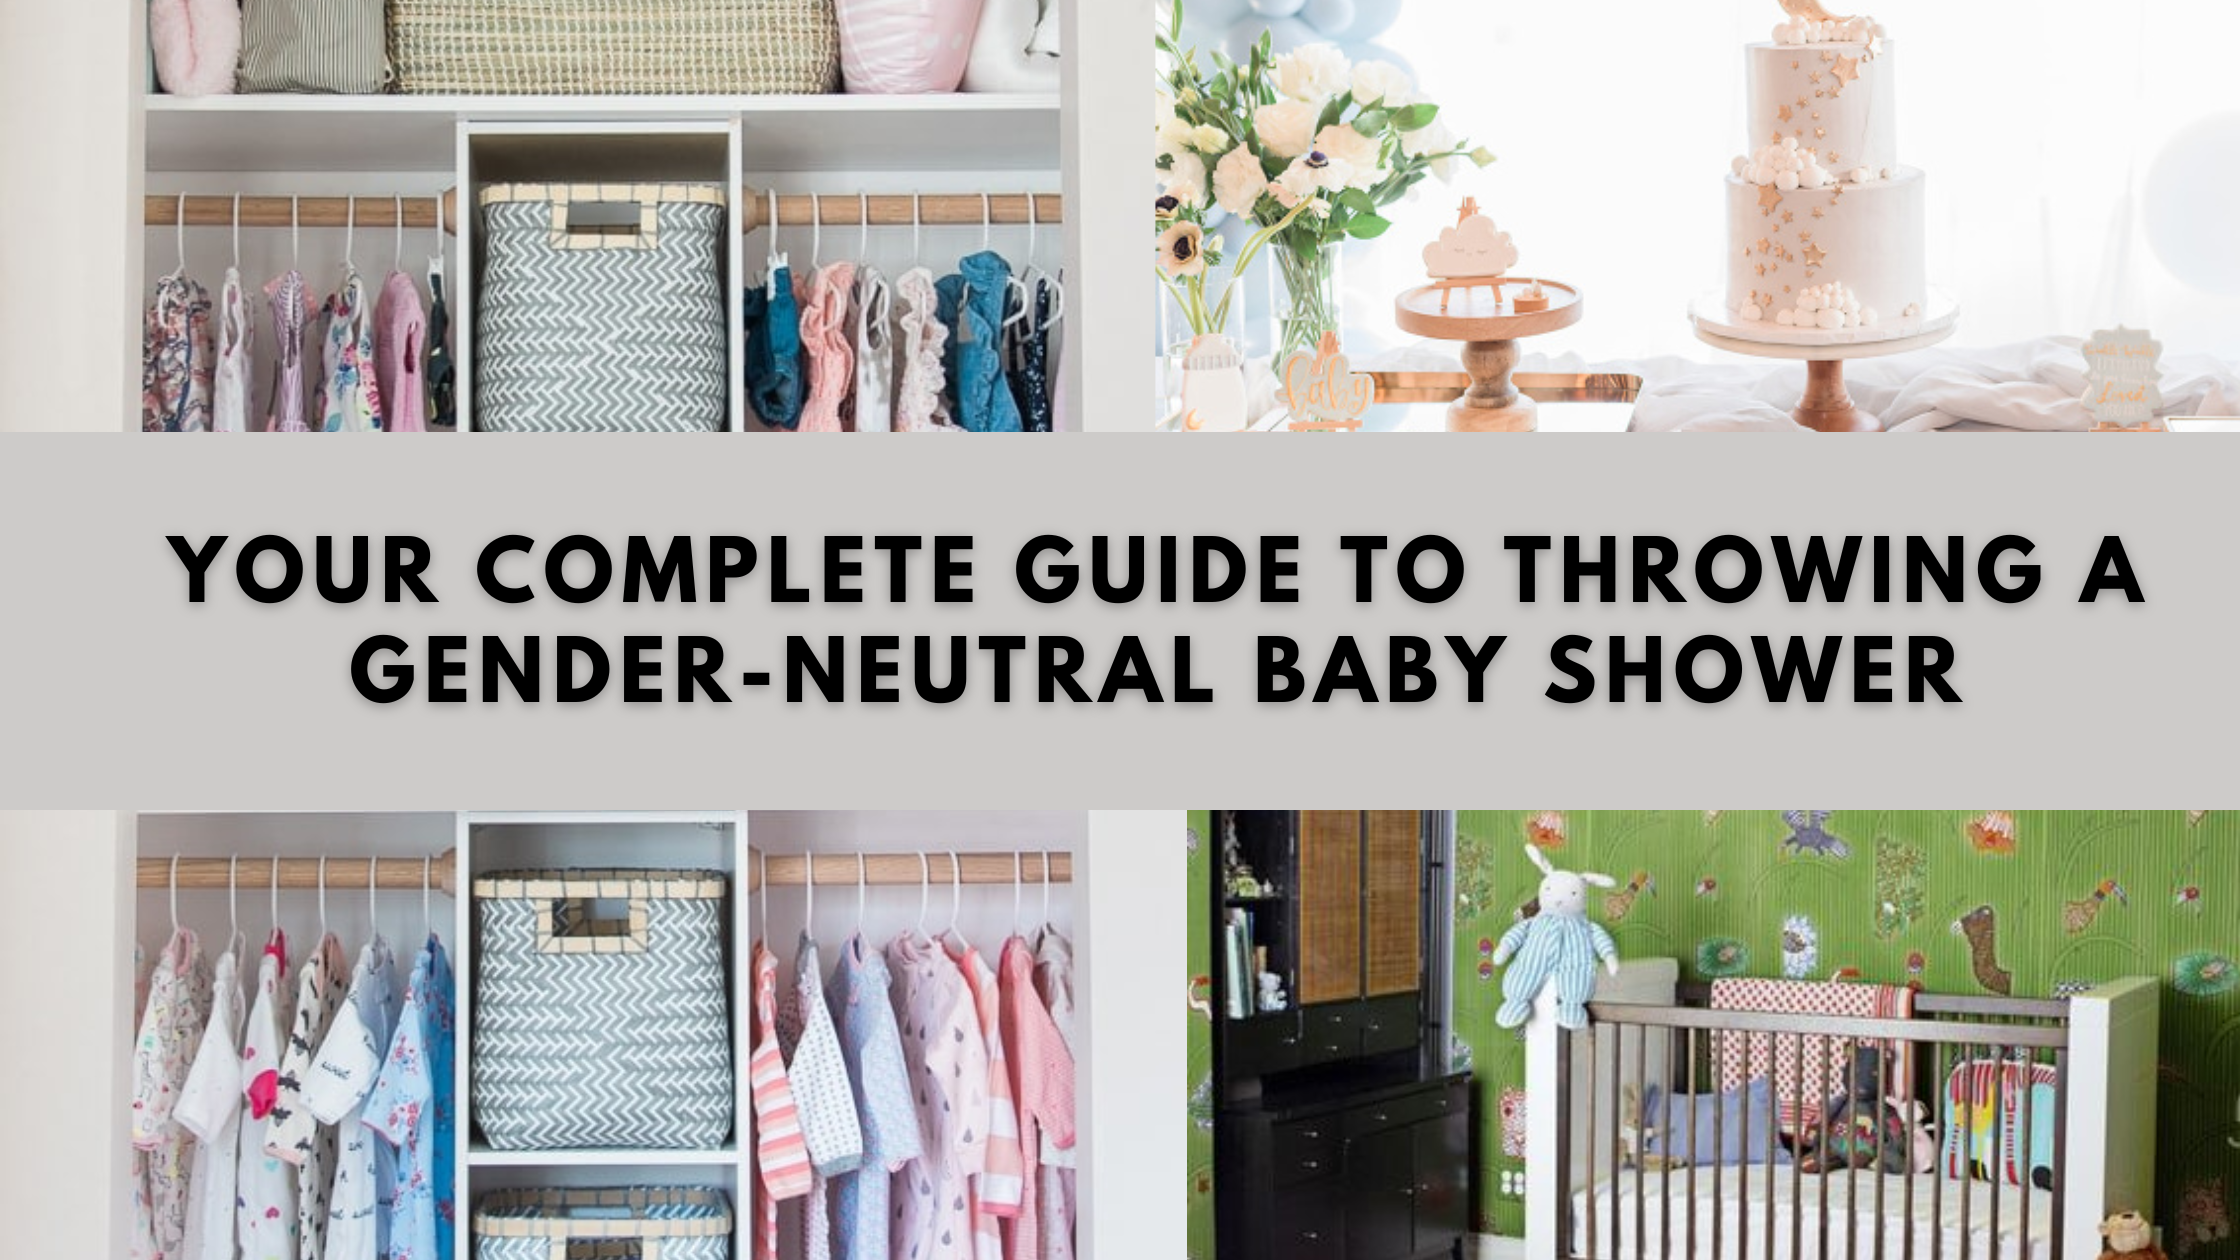 Your Complete Guide to Throwing a Gender-Neutral Baby Shower